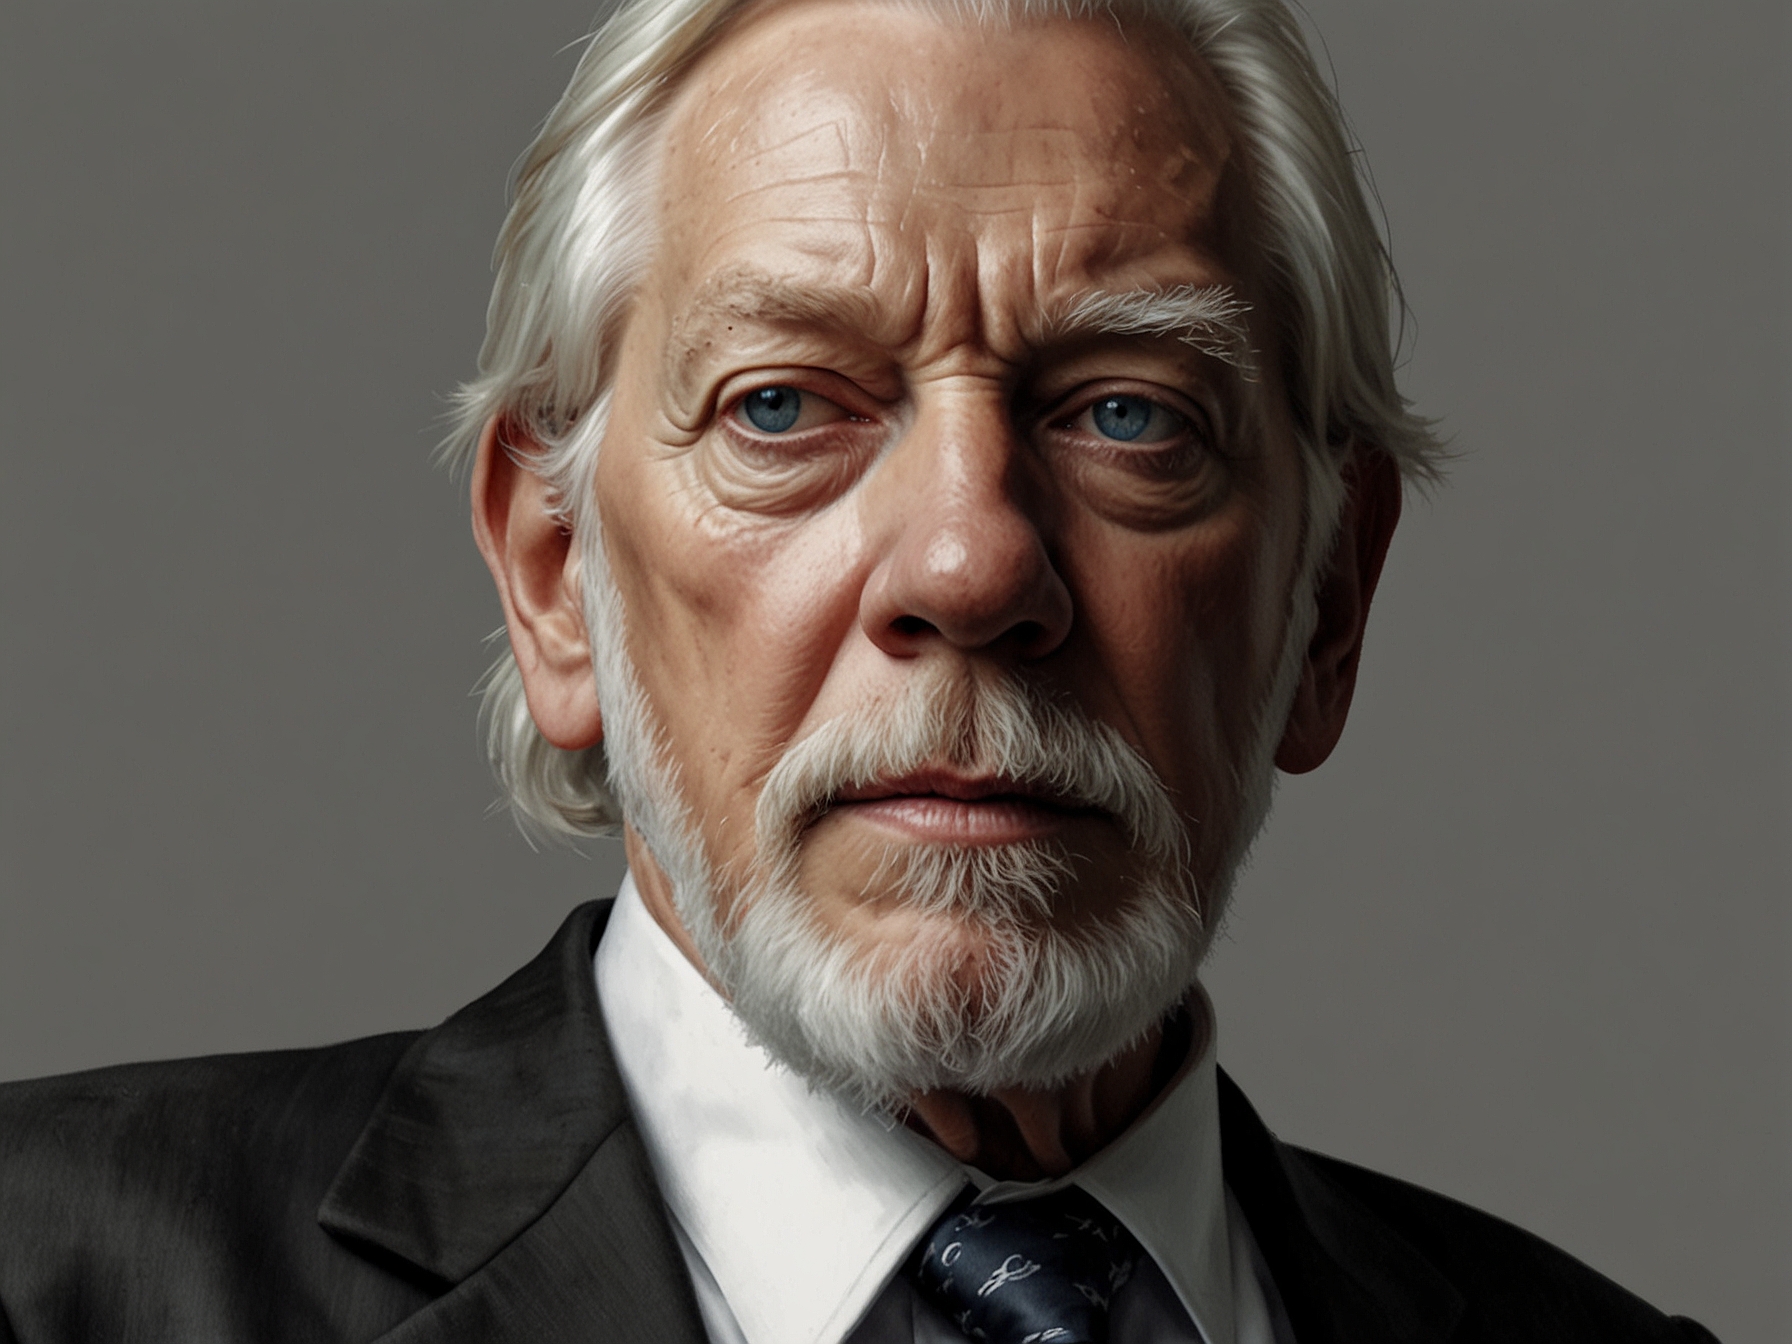 A portrait of Donald Sutherland, capturing his signature intense gaze and distinguished presence, commemorating his influential career in Hollywood.